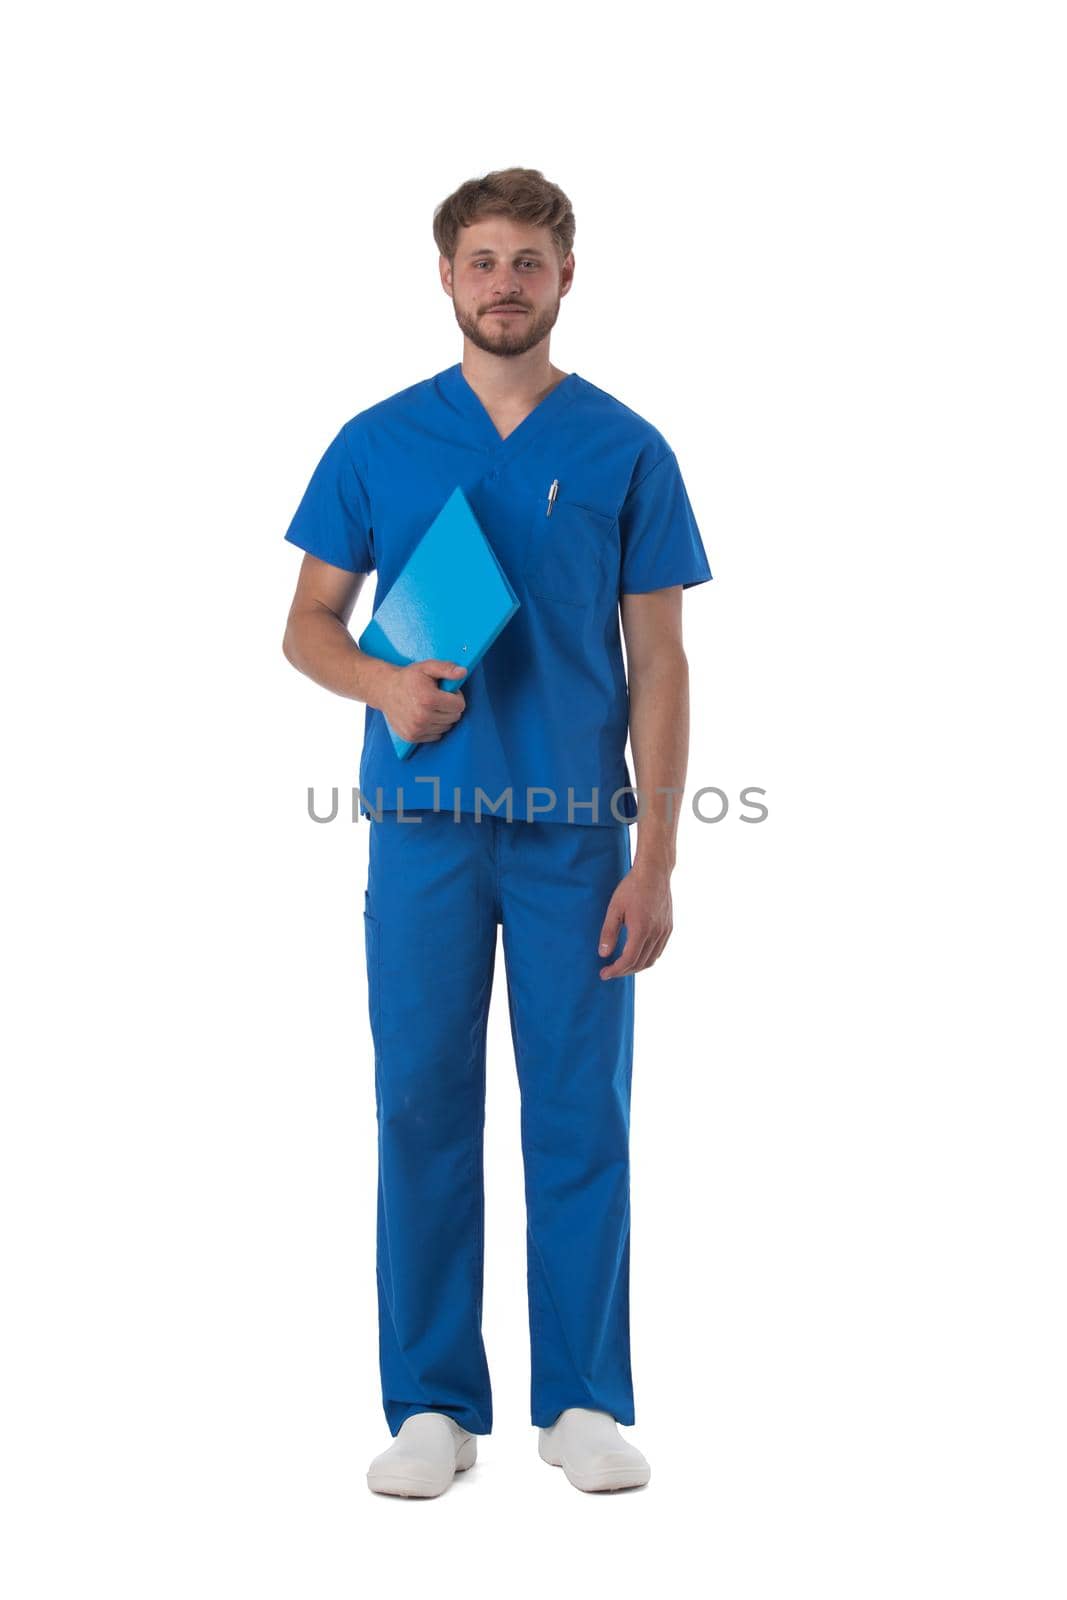 Male nurse or doctor in blue uniform studio full length portrait isolated on white background